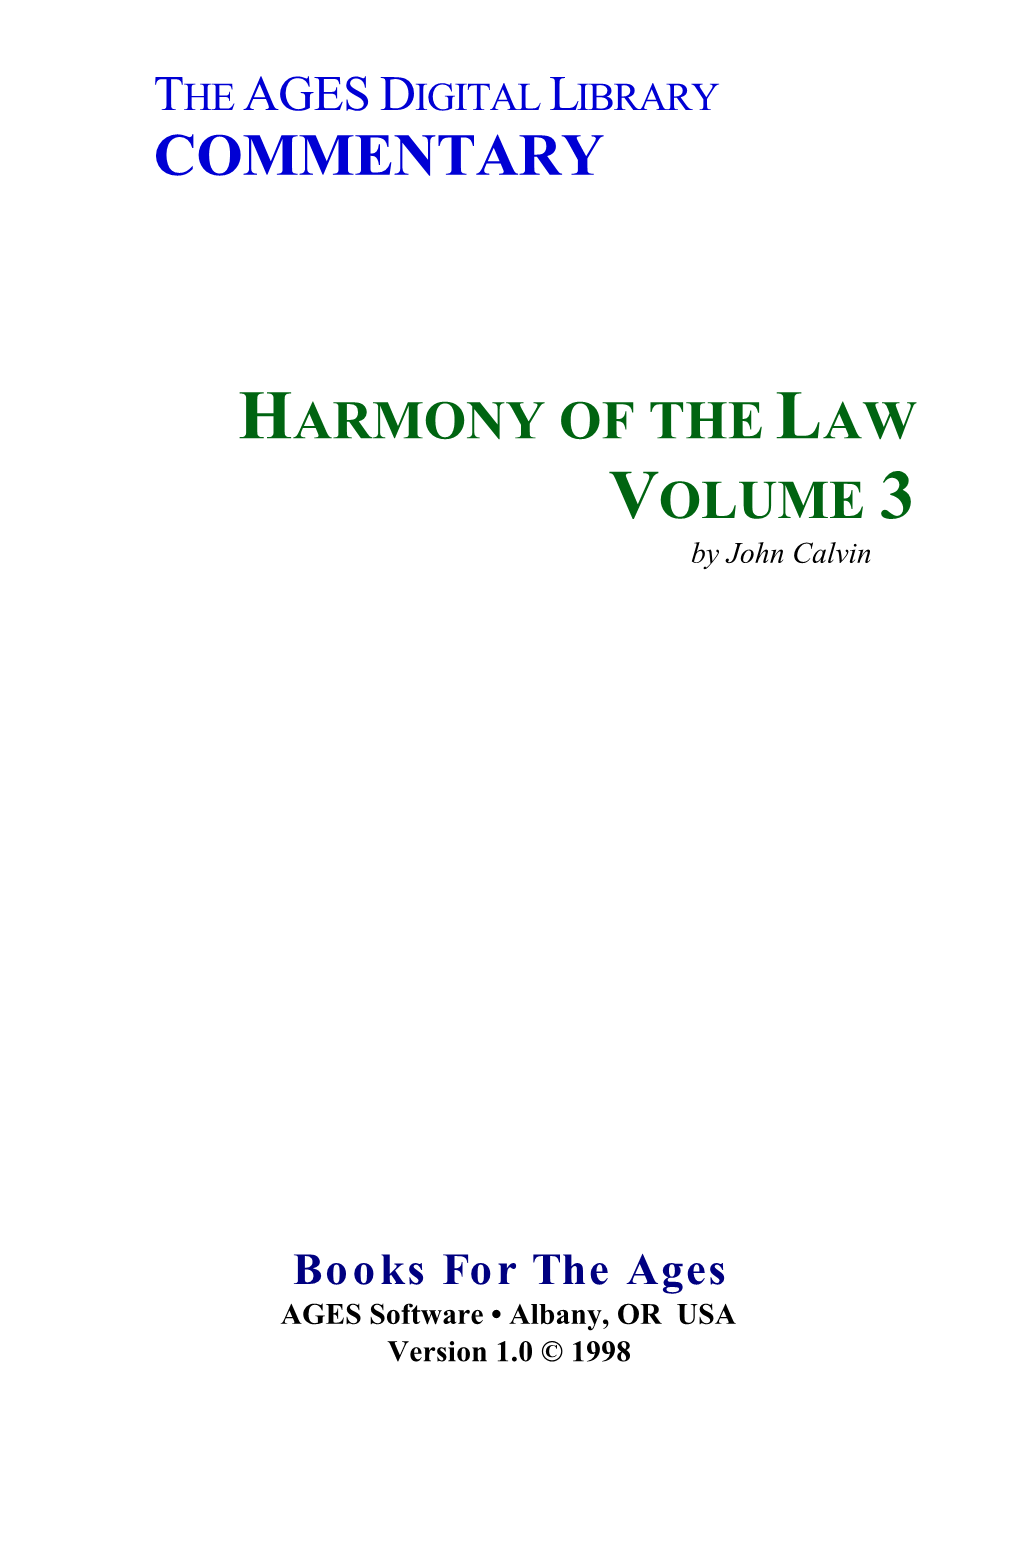 Commentary on the Harmony of the Law Vol. 3